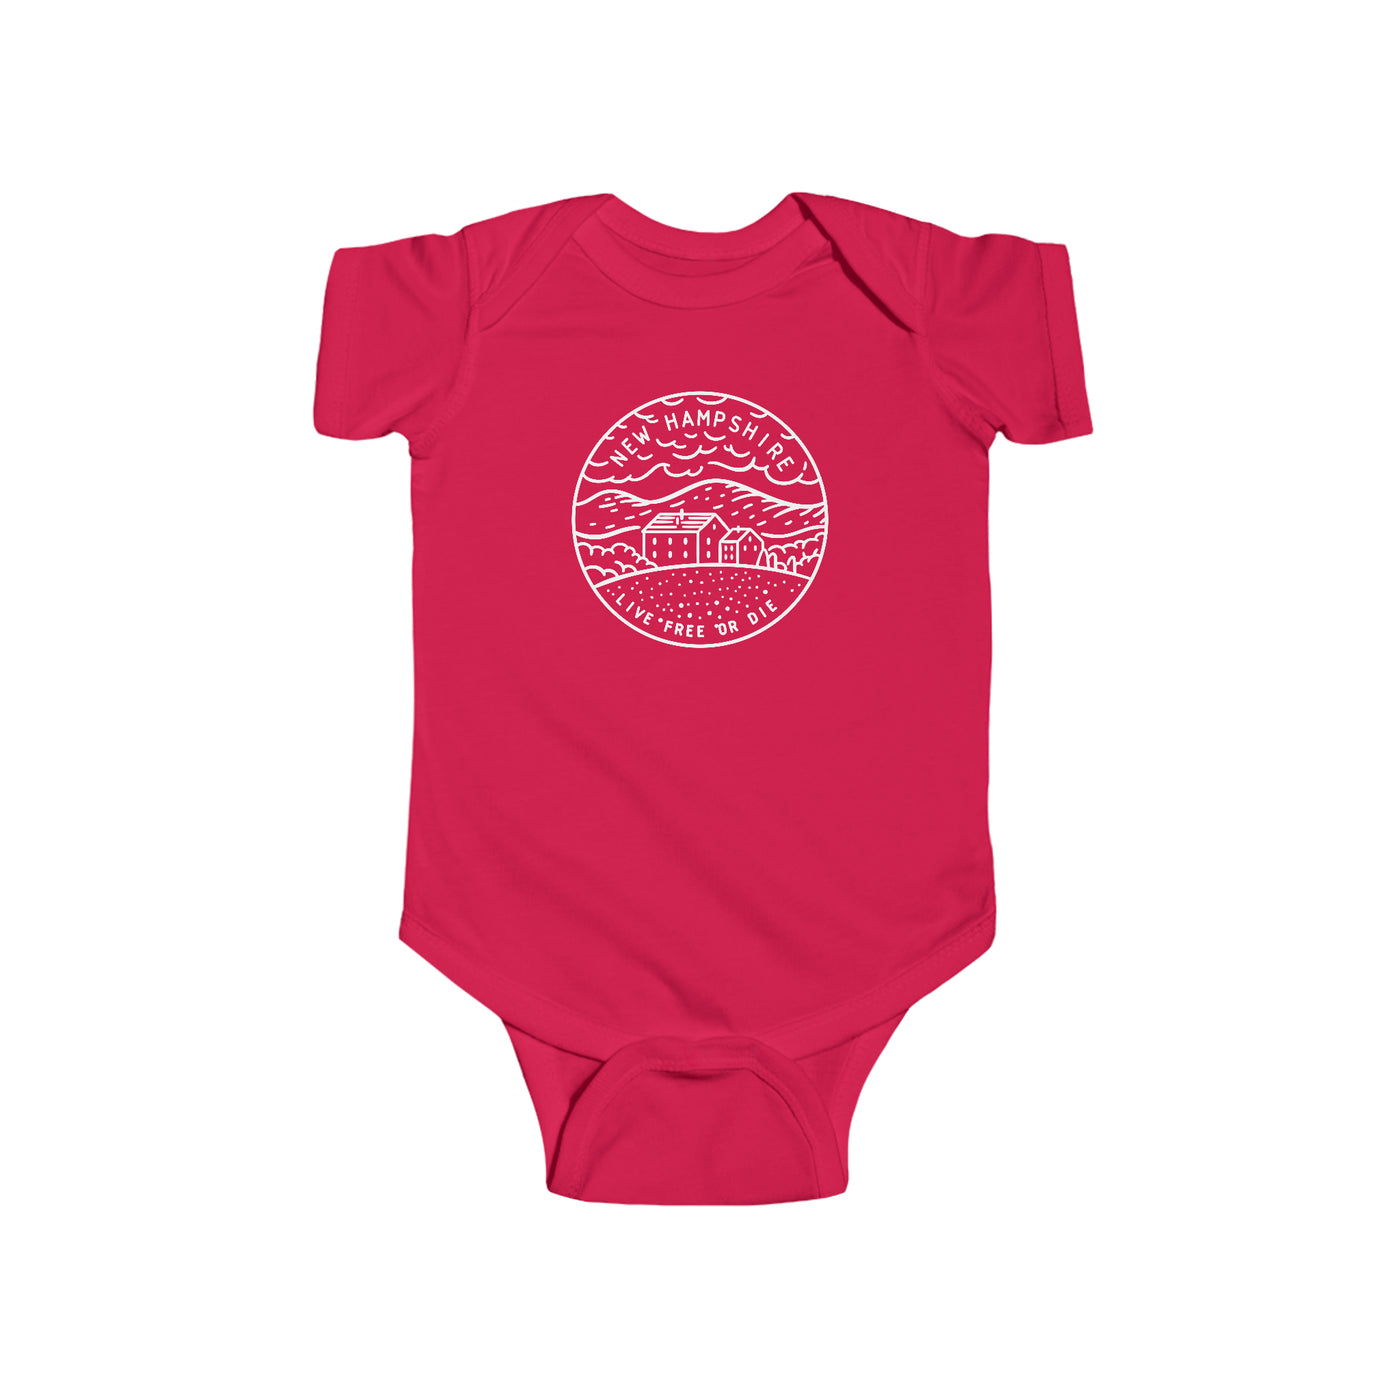 New Hampshire State Motto Baby Bodysuit